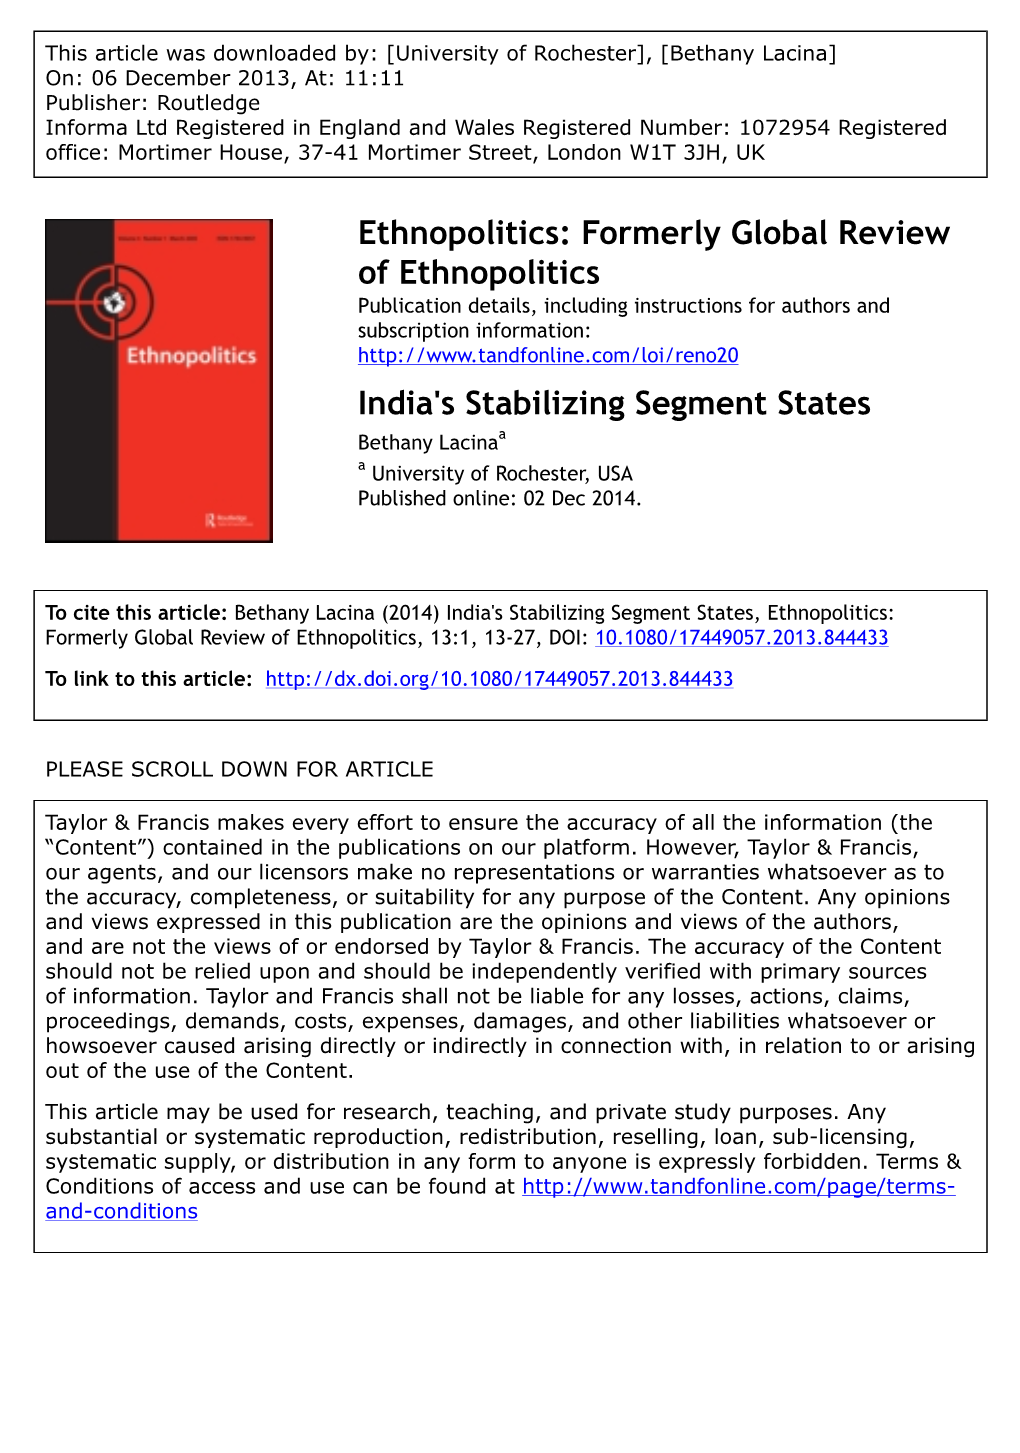 Formerly Global Review of Ethnopolitics India's Stabilizing